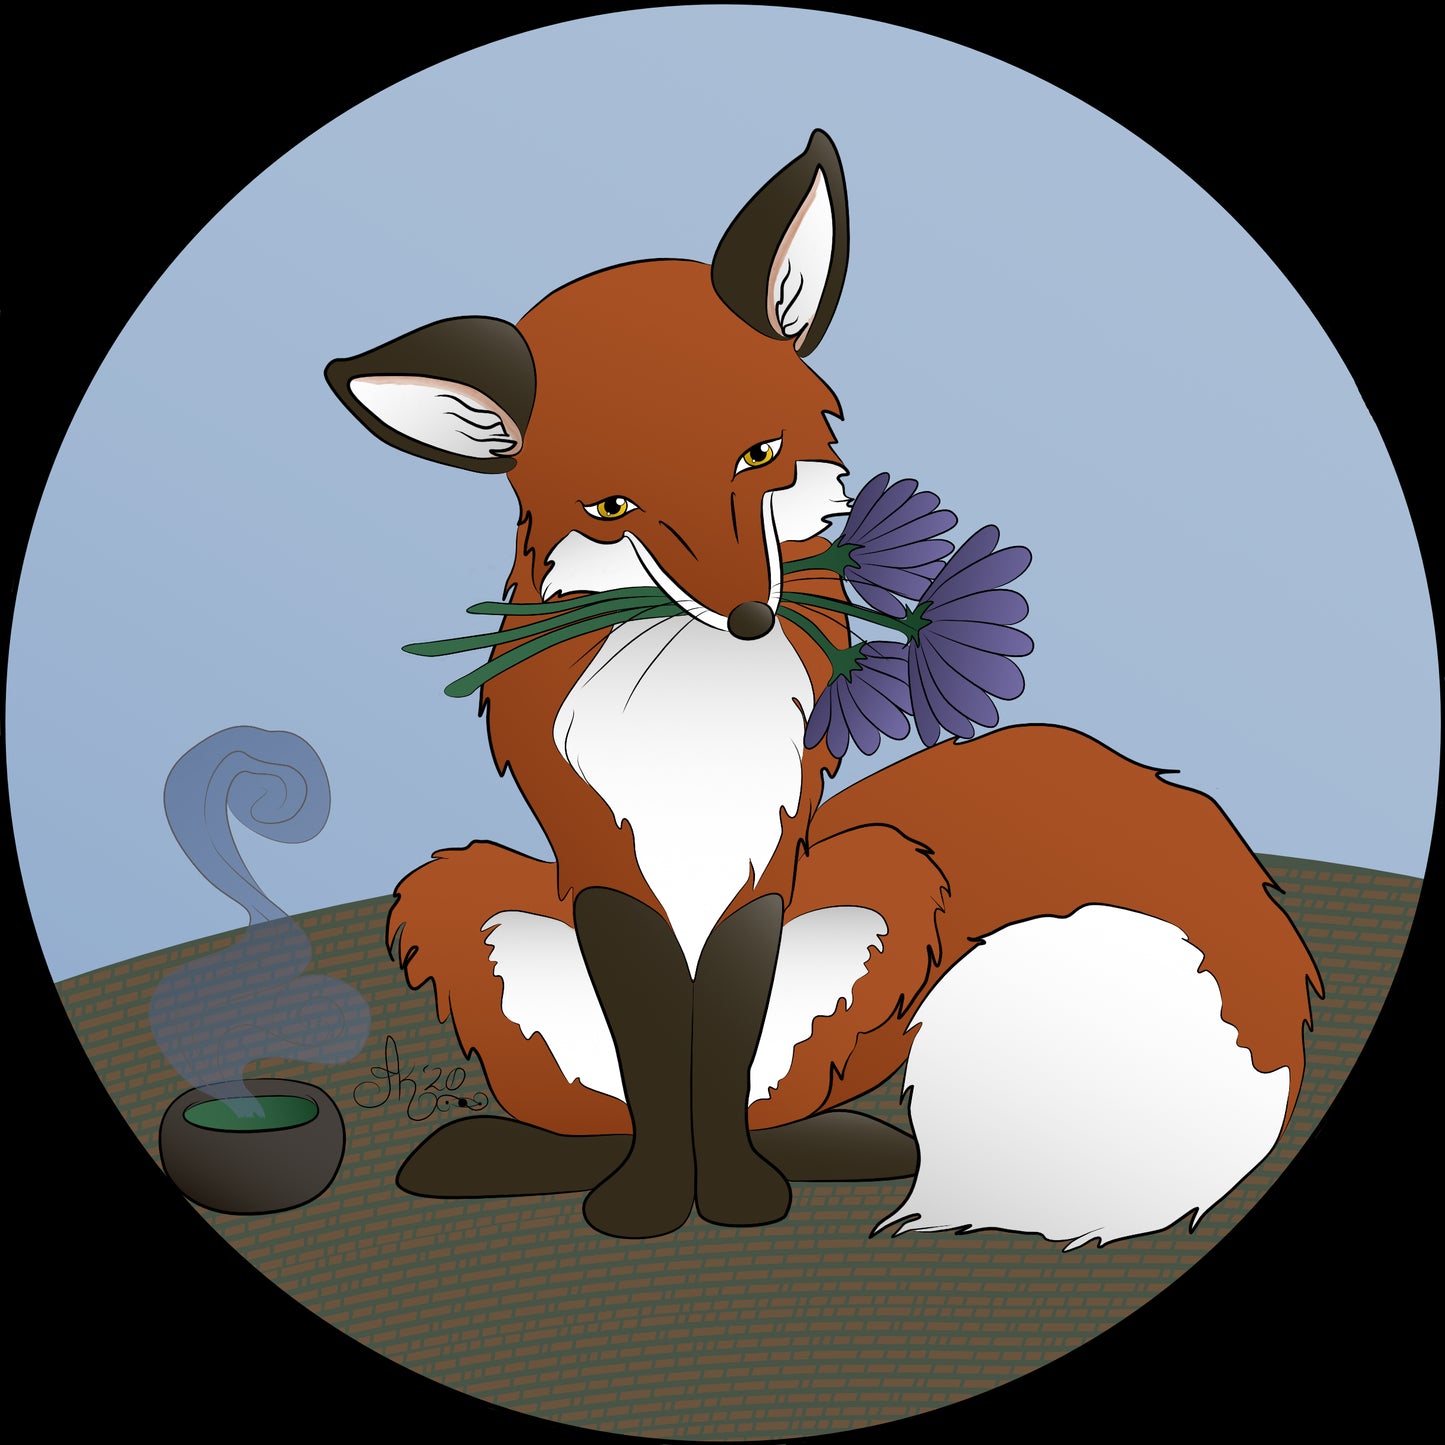 Cards - A Skulk of Foxes (Series)